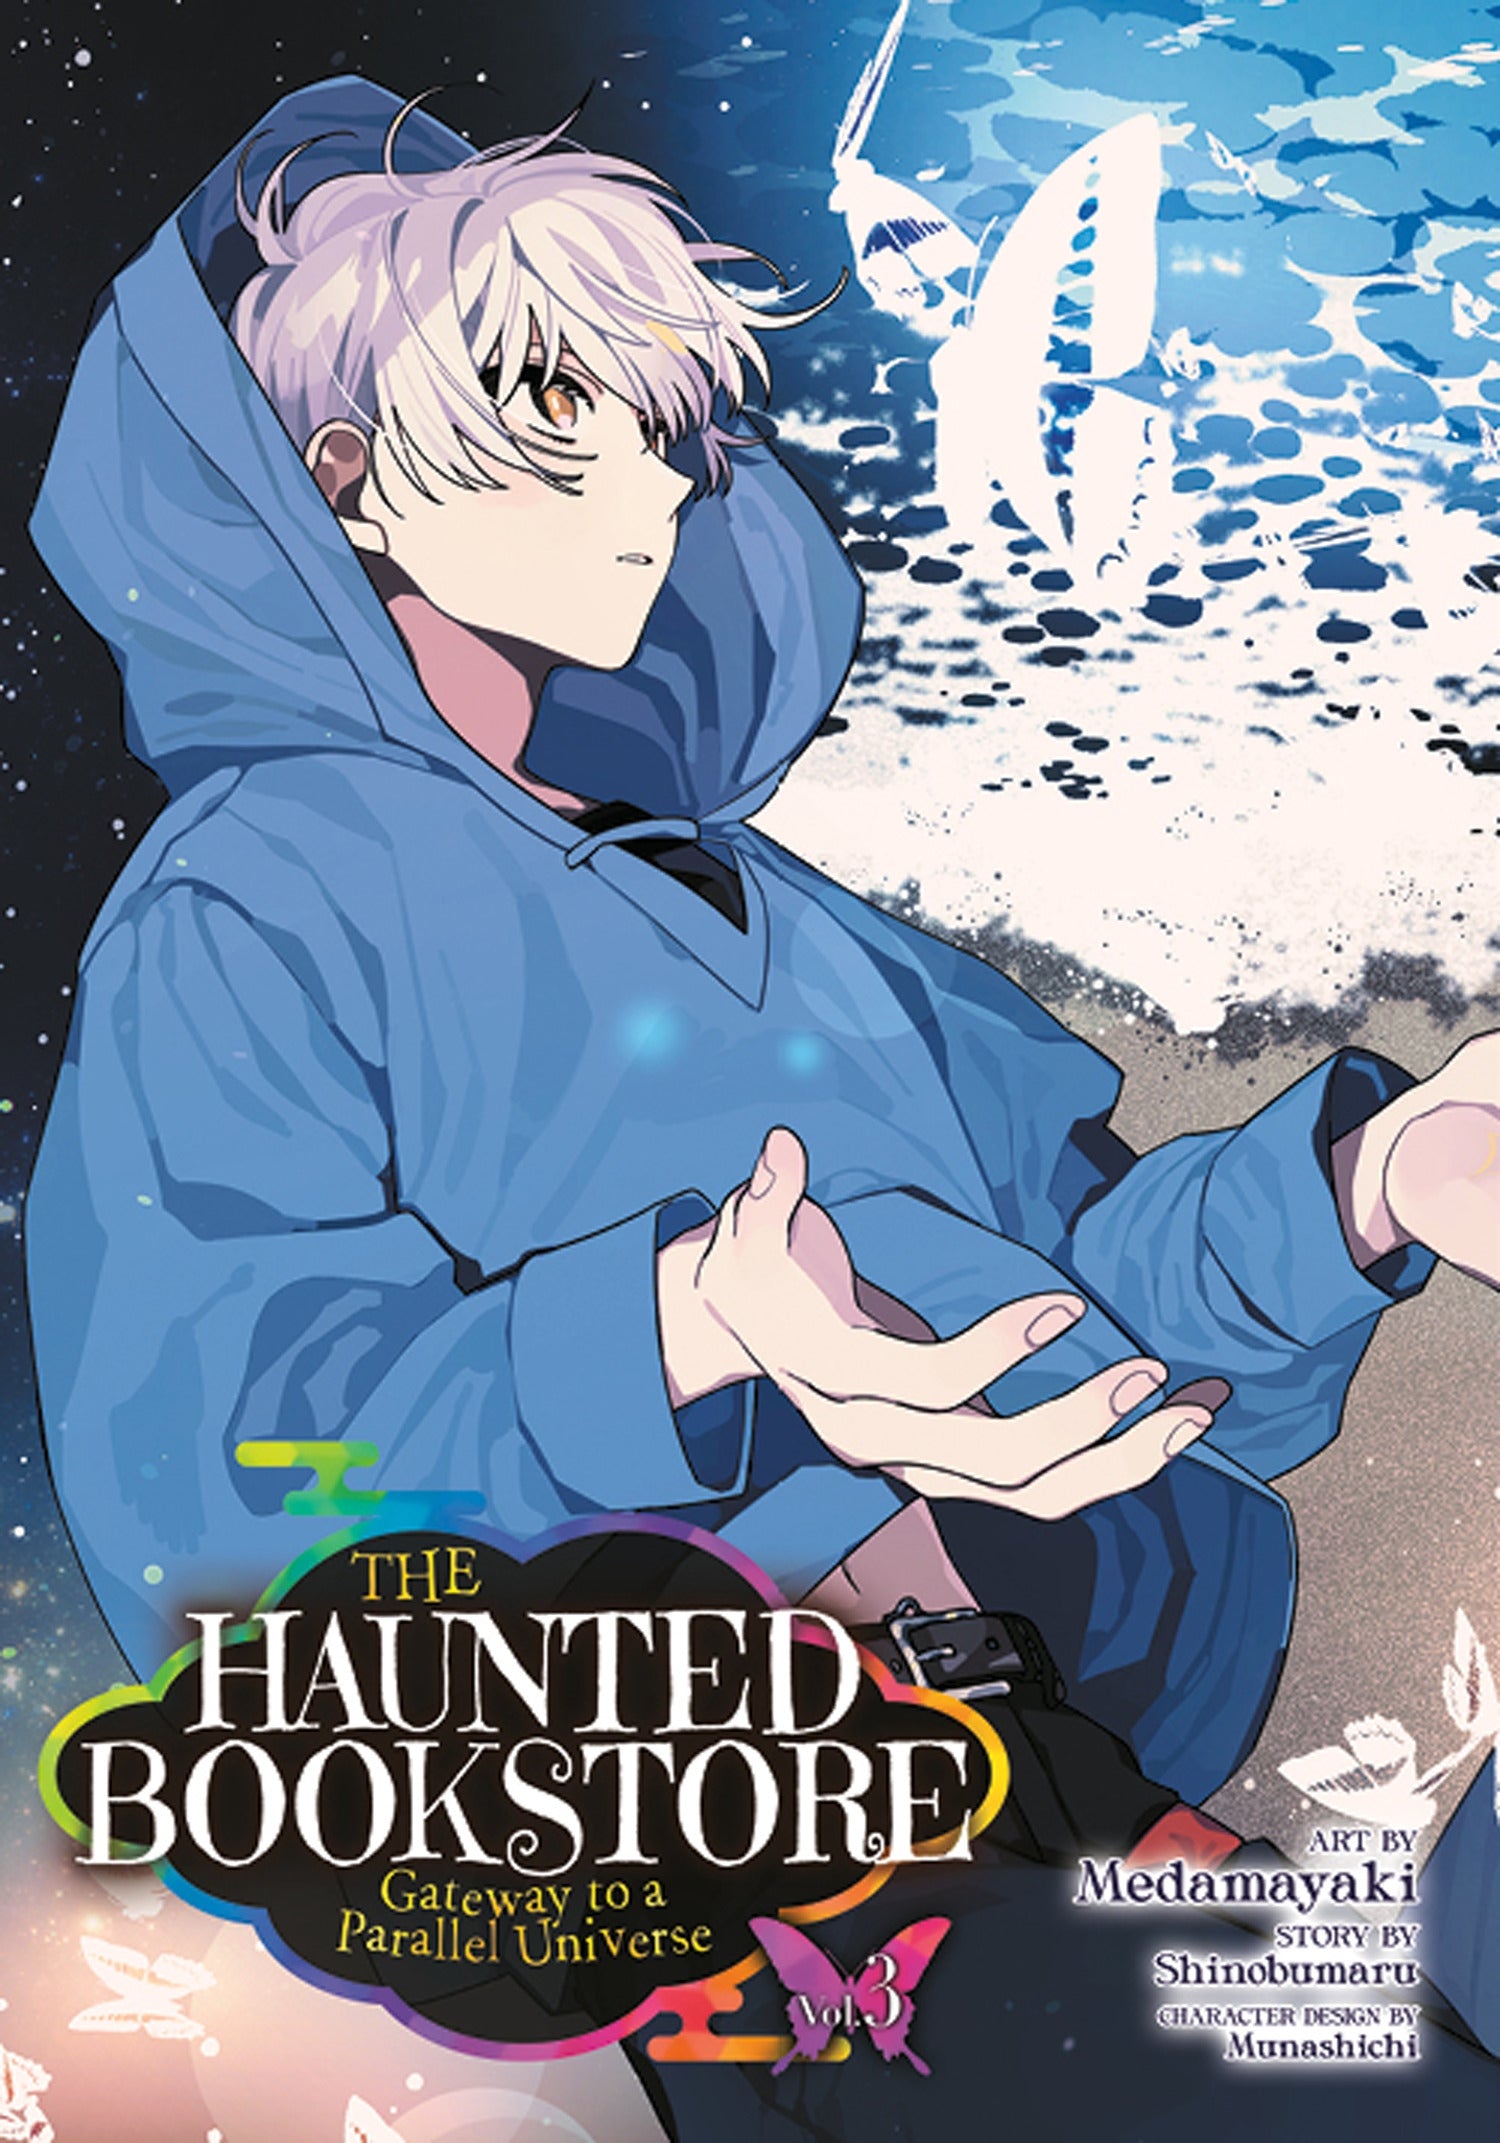 The Haunted Bookstore - Gateway to a Parallel Universe (Manga) Vol. 03